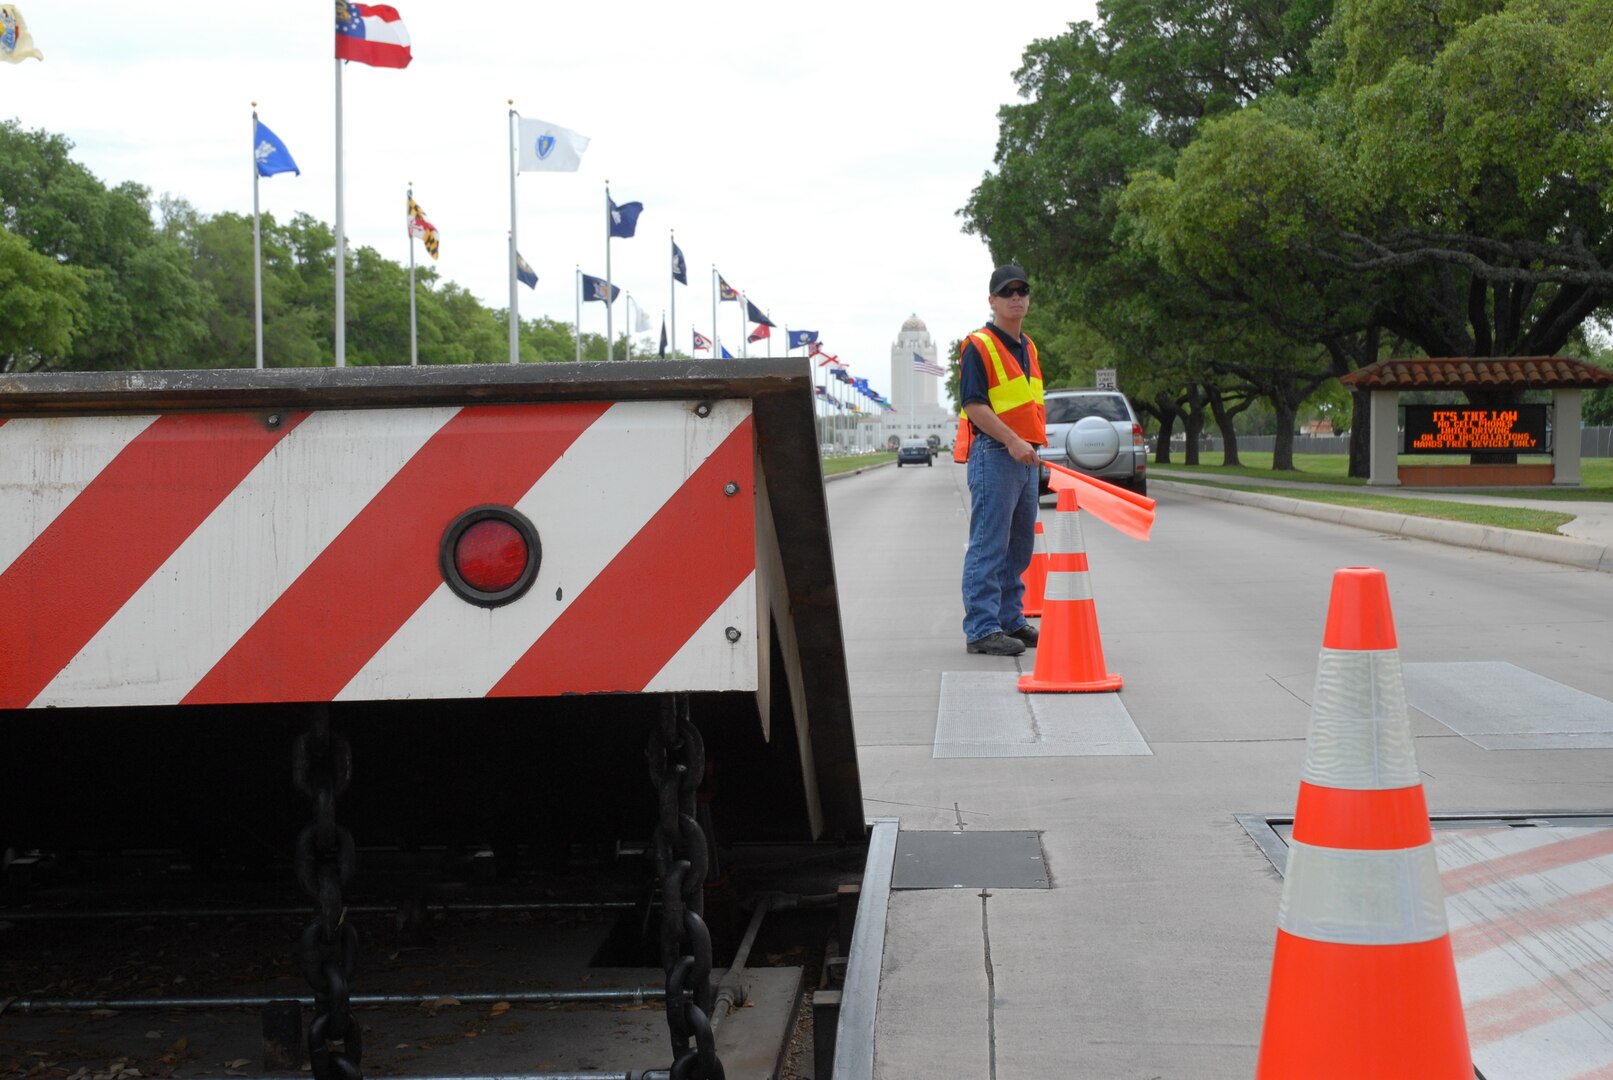 Doug Hyland, a maintenance contractor with Stobil Enterprises, directs incoming base traffic around an in-ground denial barrier on Harmon Drive at Randolph Air Froce Base, TX, April 12. (U.S. Air Force photo by Senior Airman Katie Hickerson)